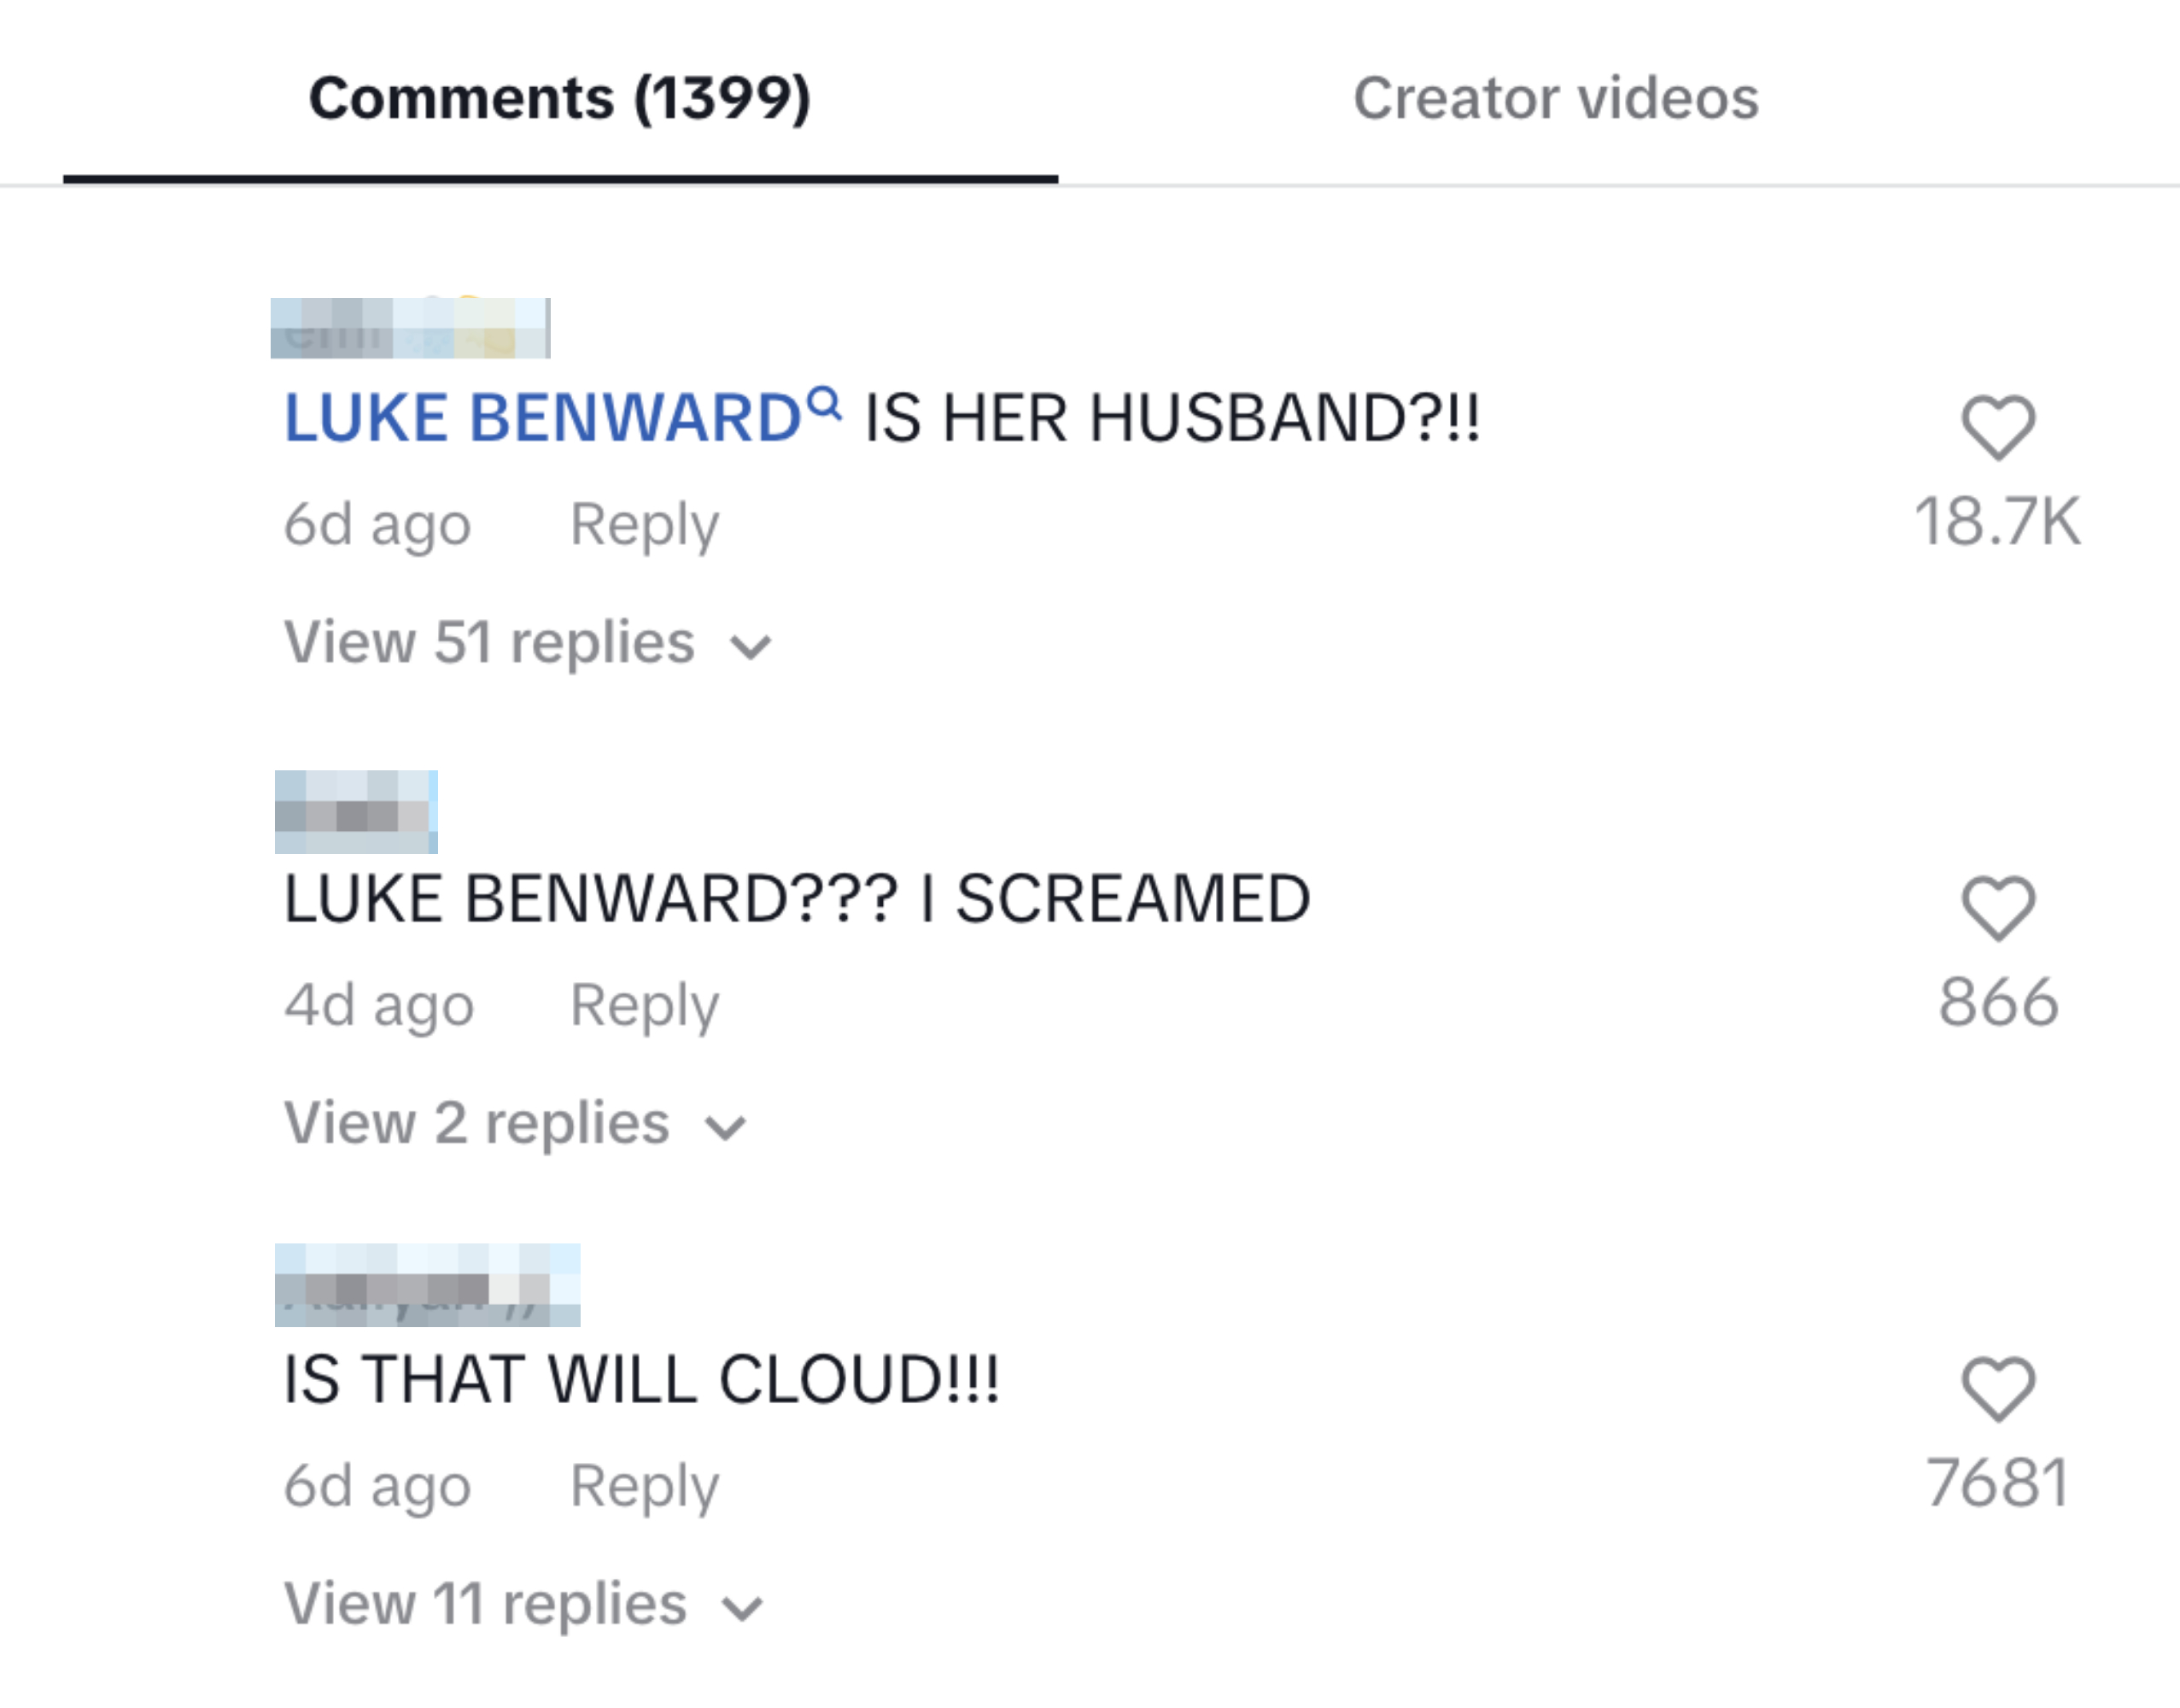 The image shows a screenshot of social media comments expressing surprise about Luke Benward, with highlighted engagement